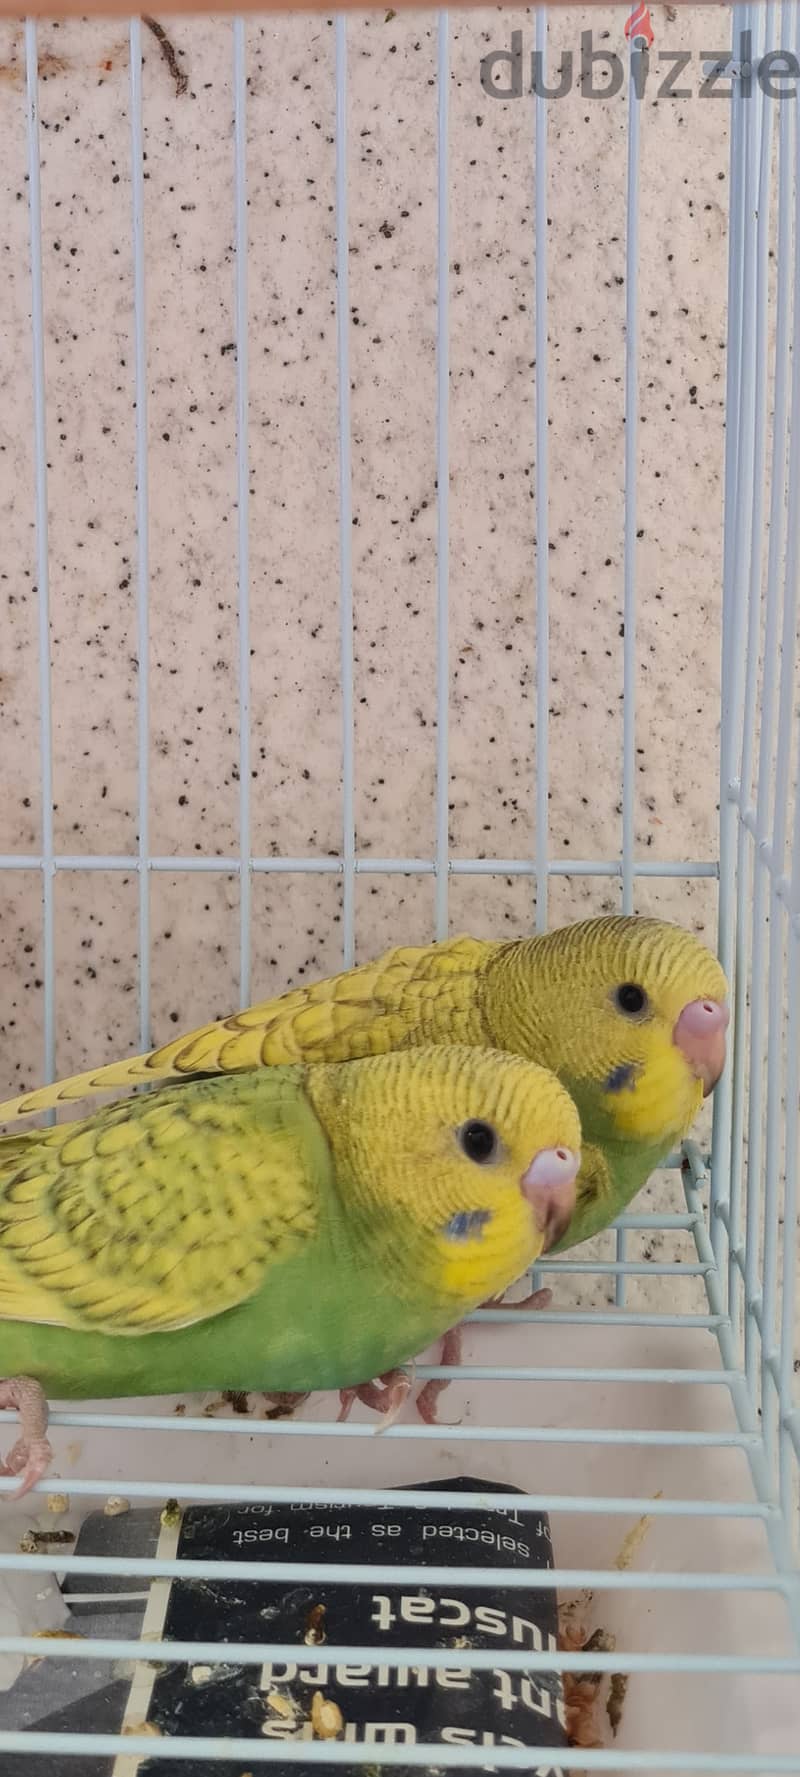 3 home breed budgies 1